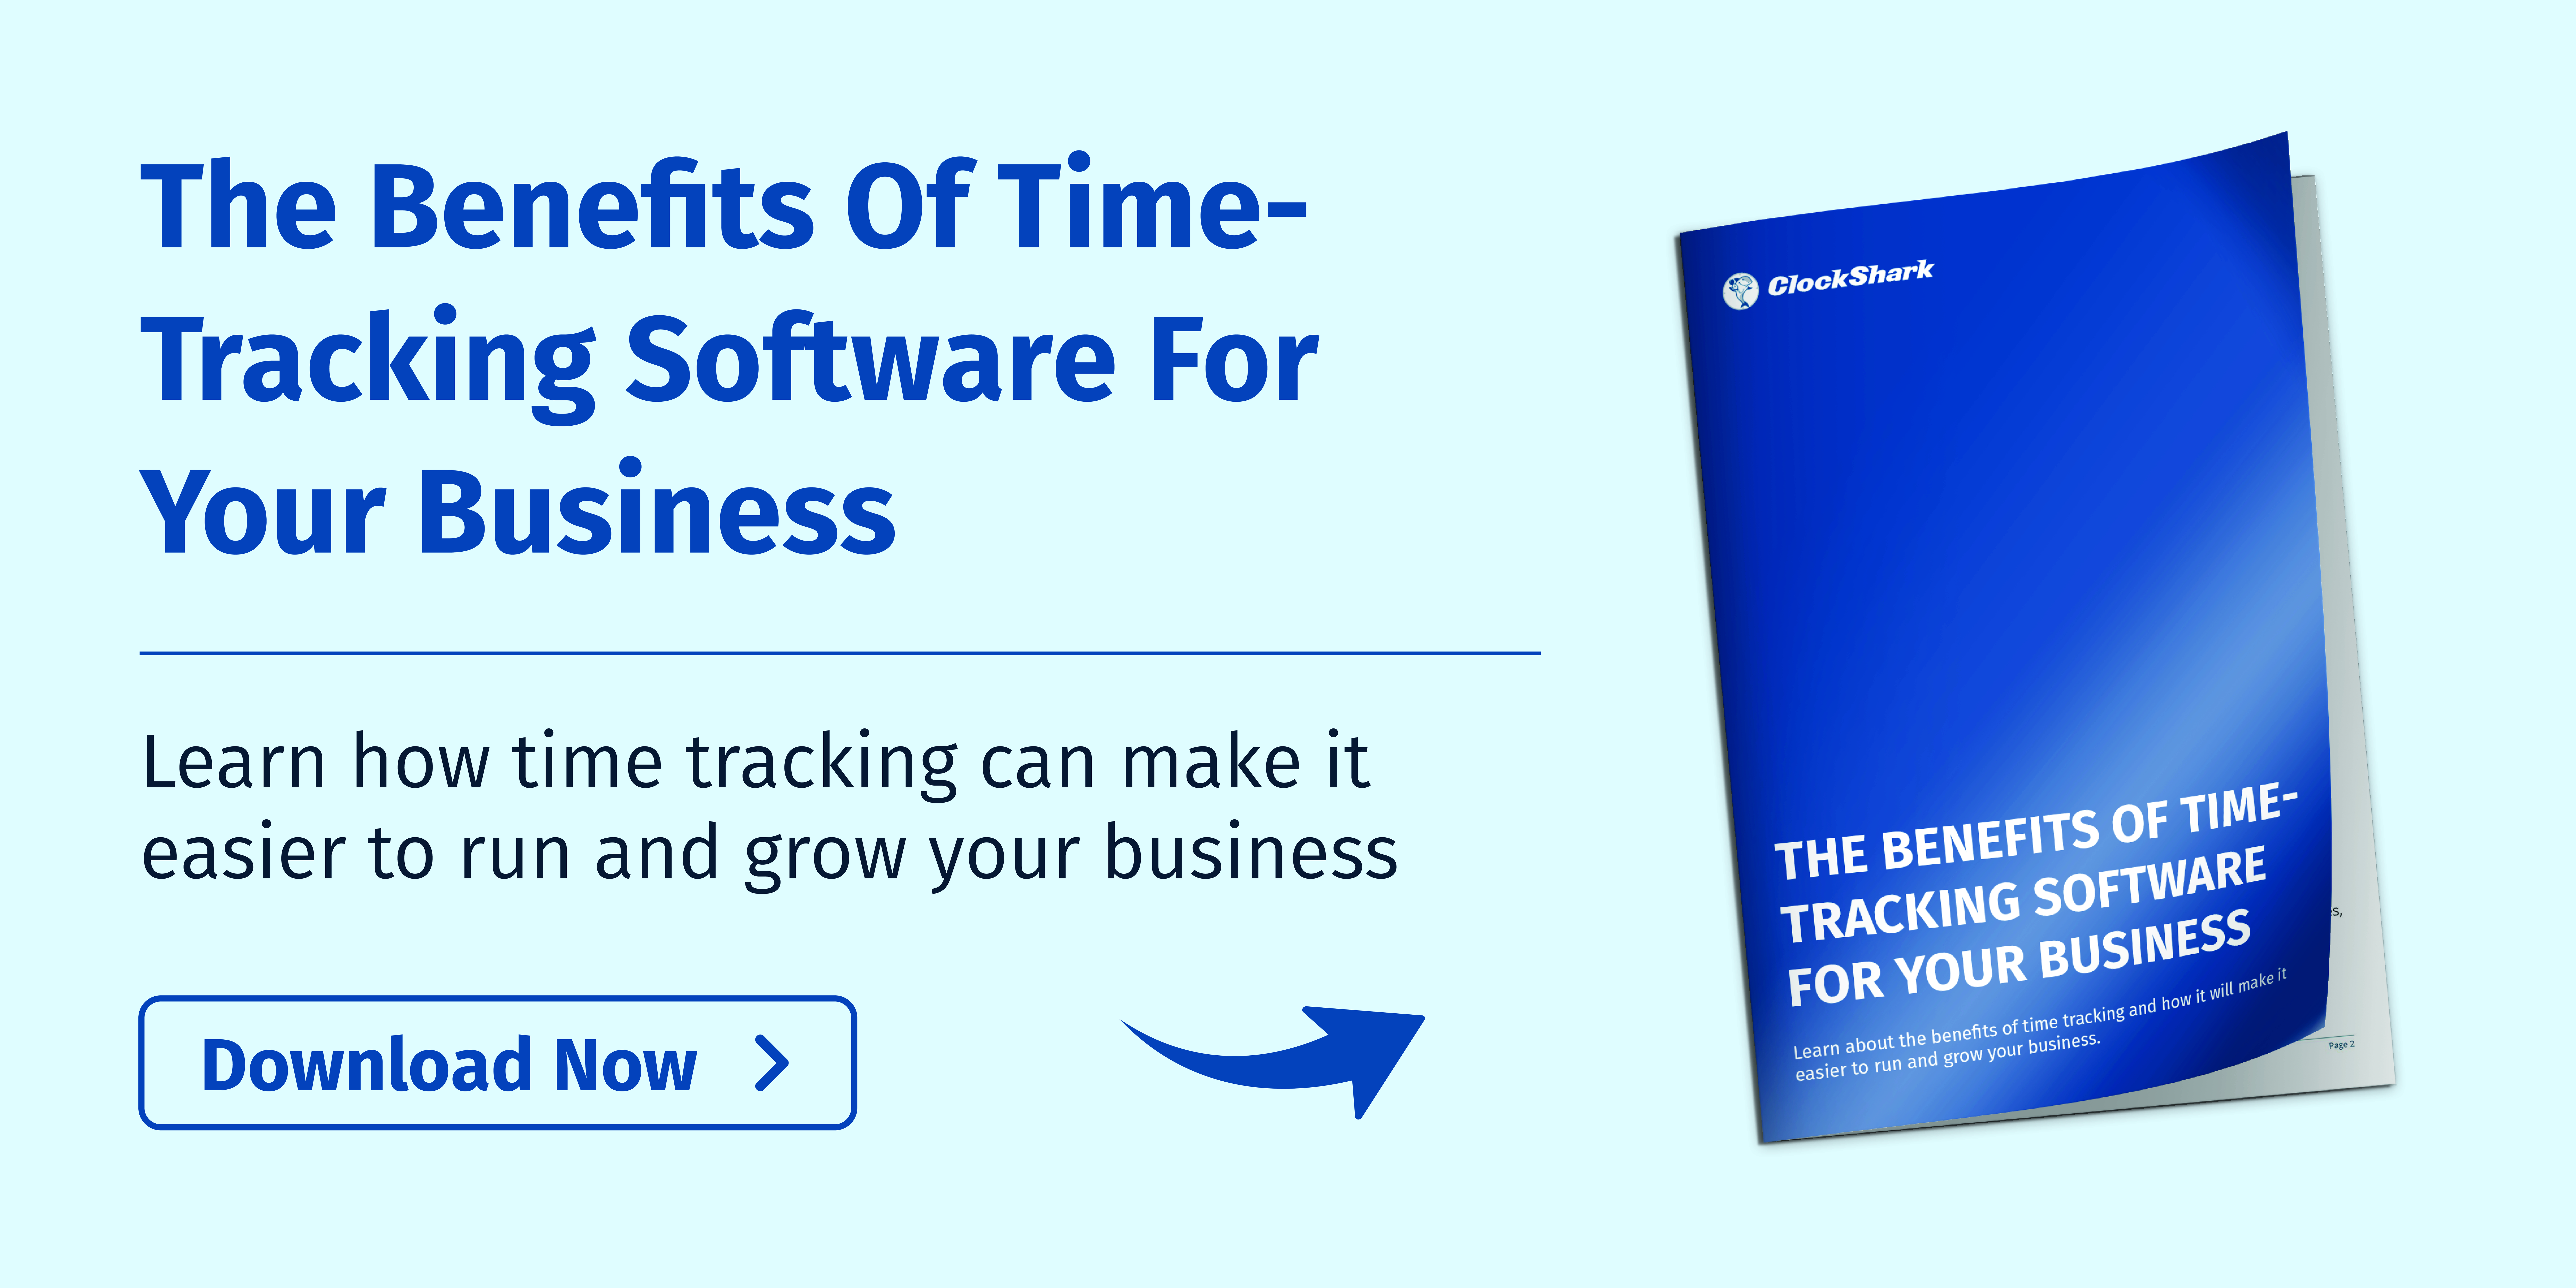 Benefits of time-tracking software